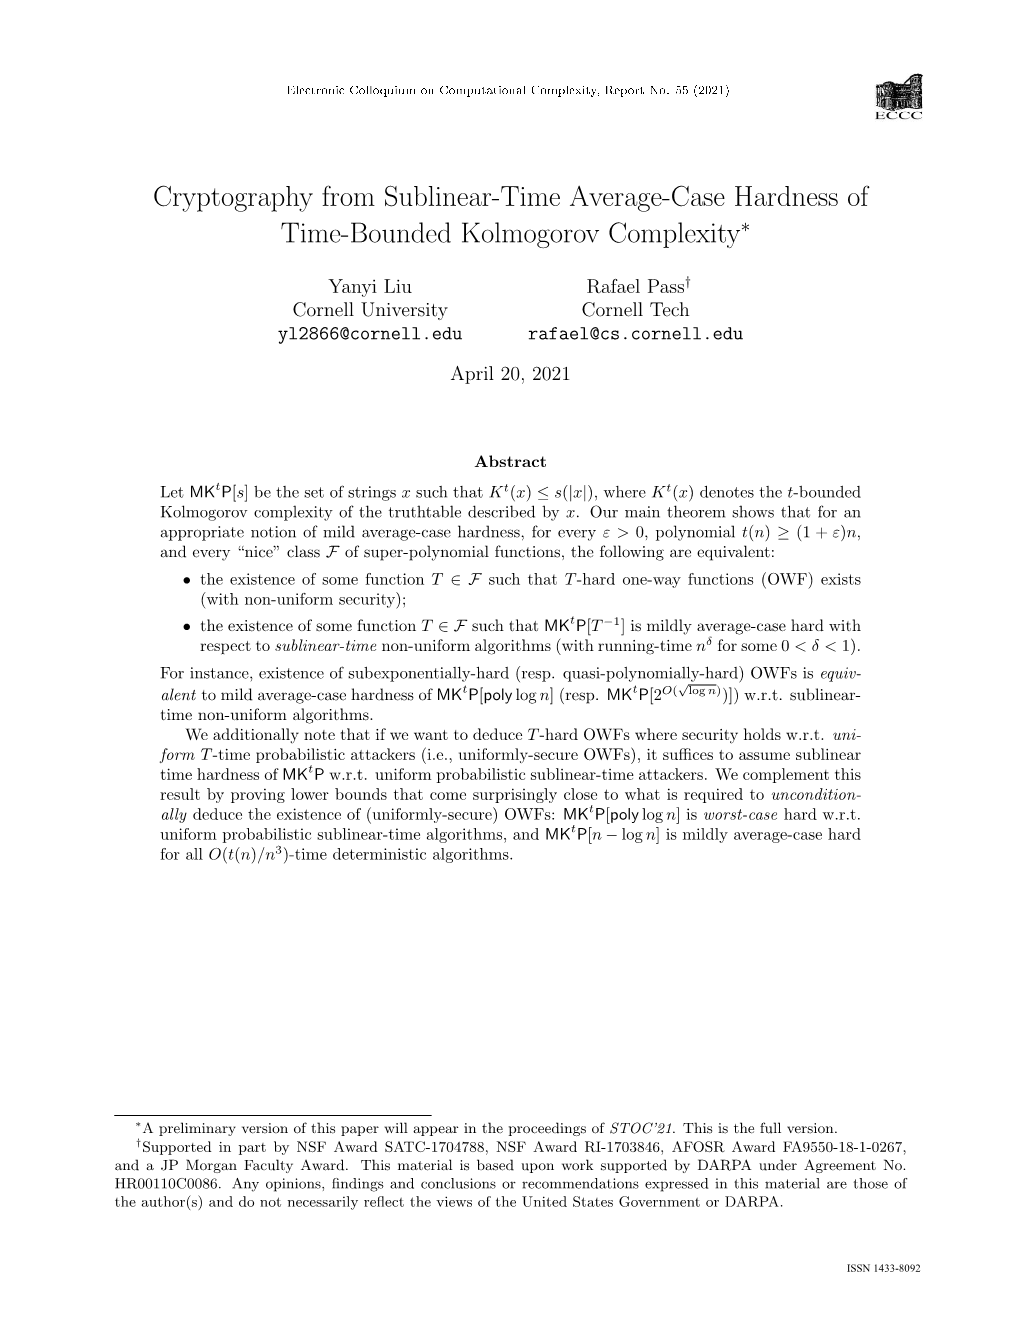 Cryptography from Sublinear-Time Average-Case Hardness of Time-Bounded Kolmogorov Complexity∗